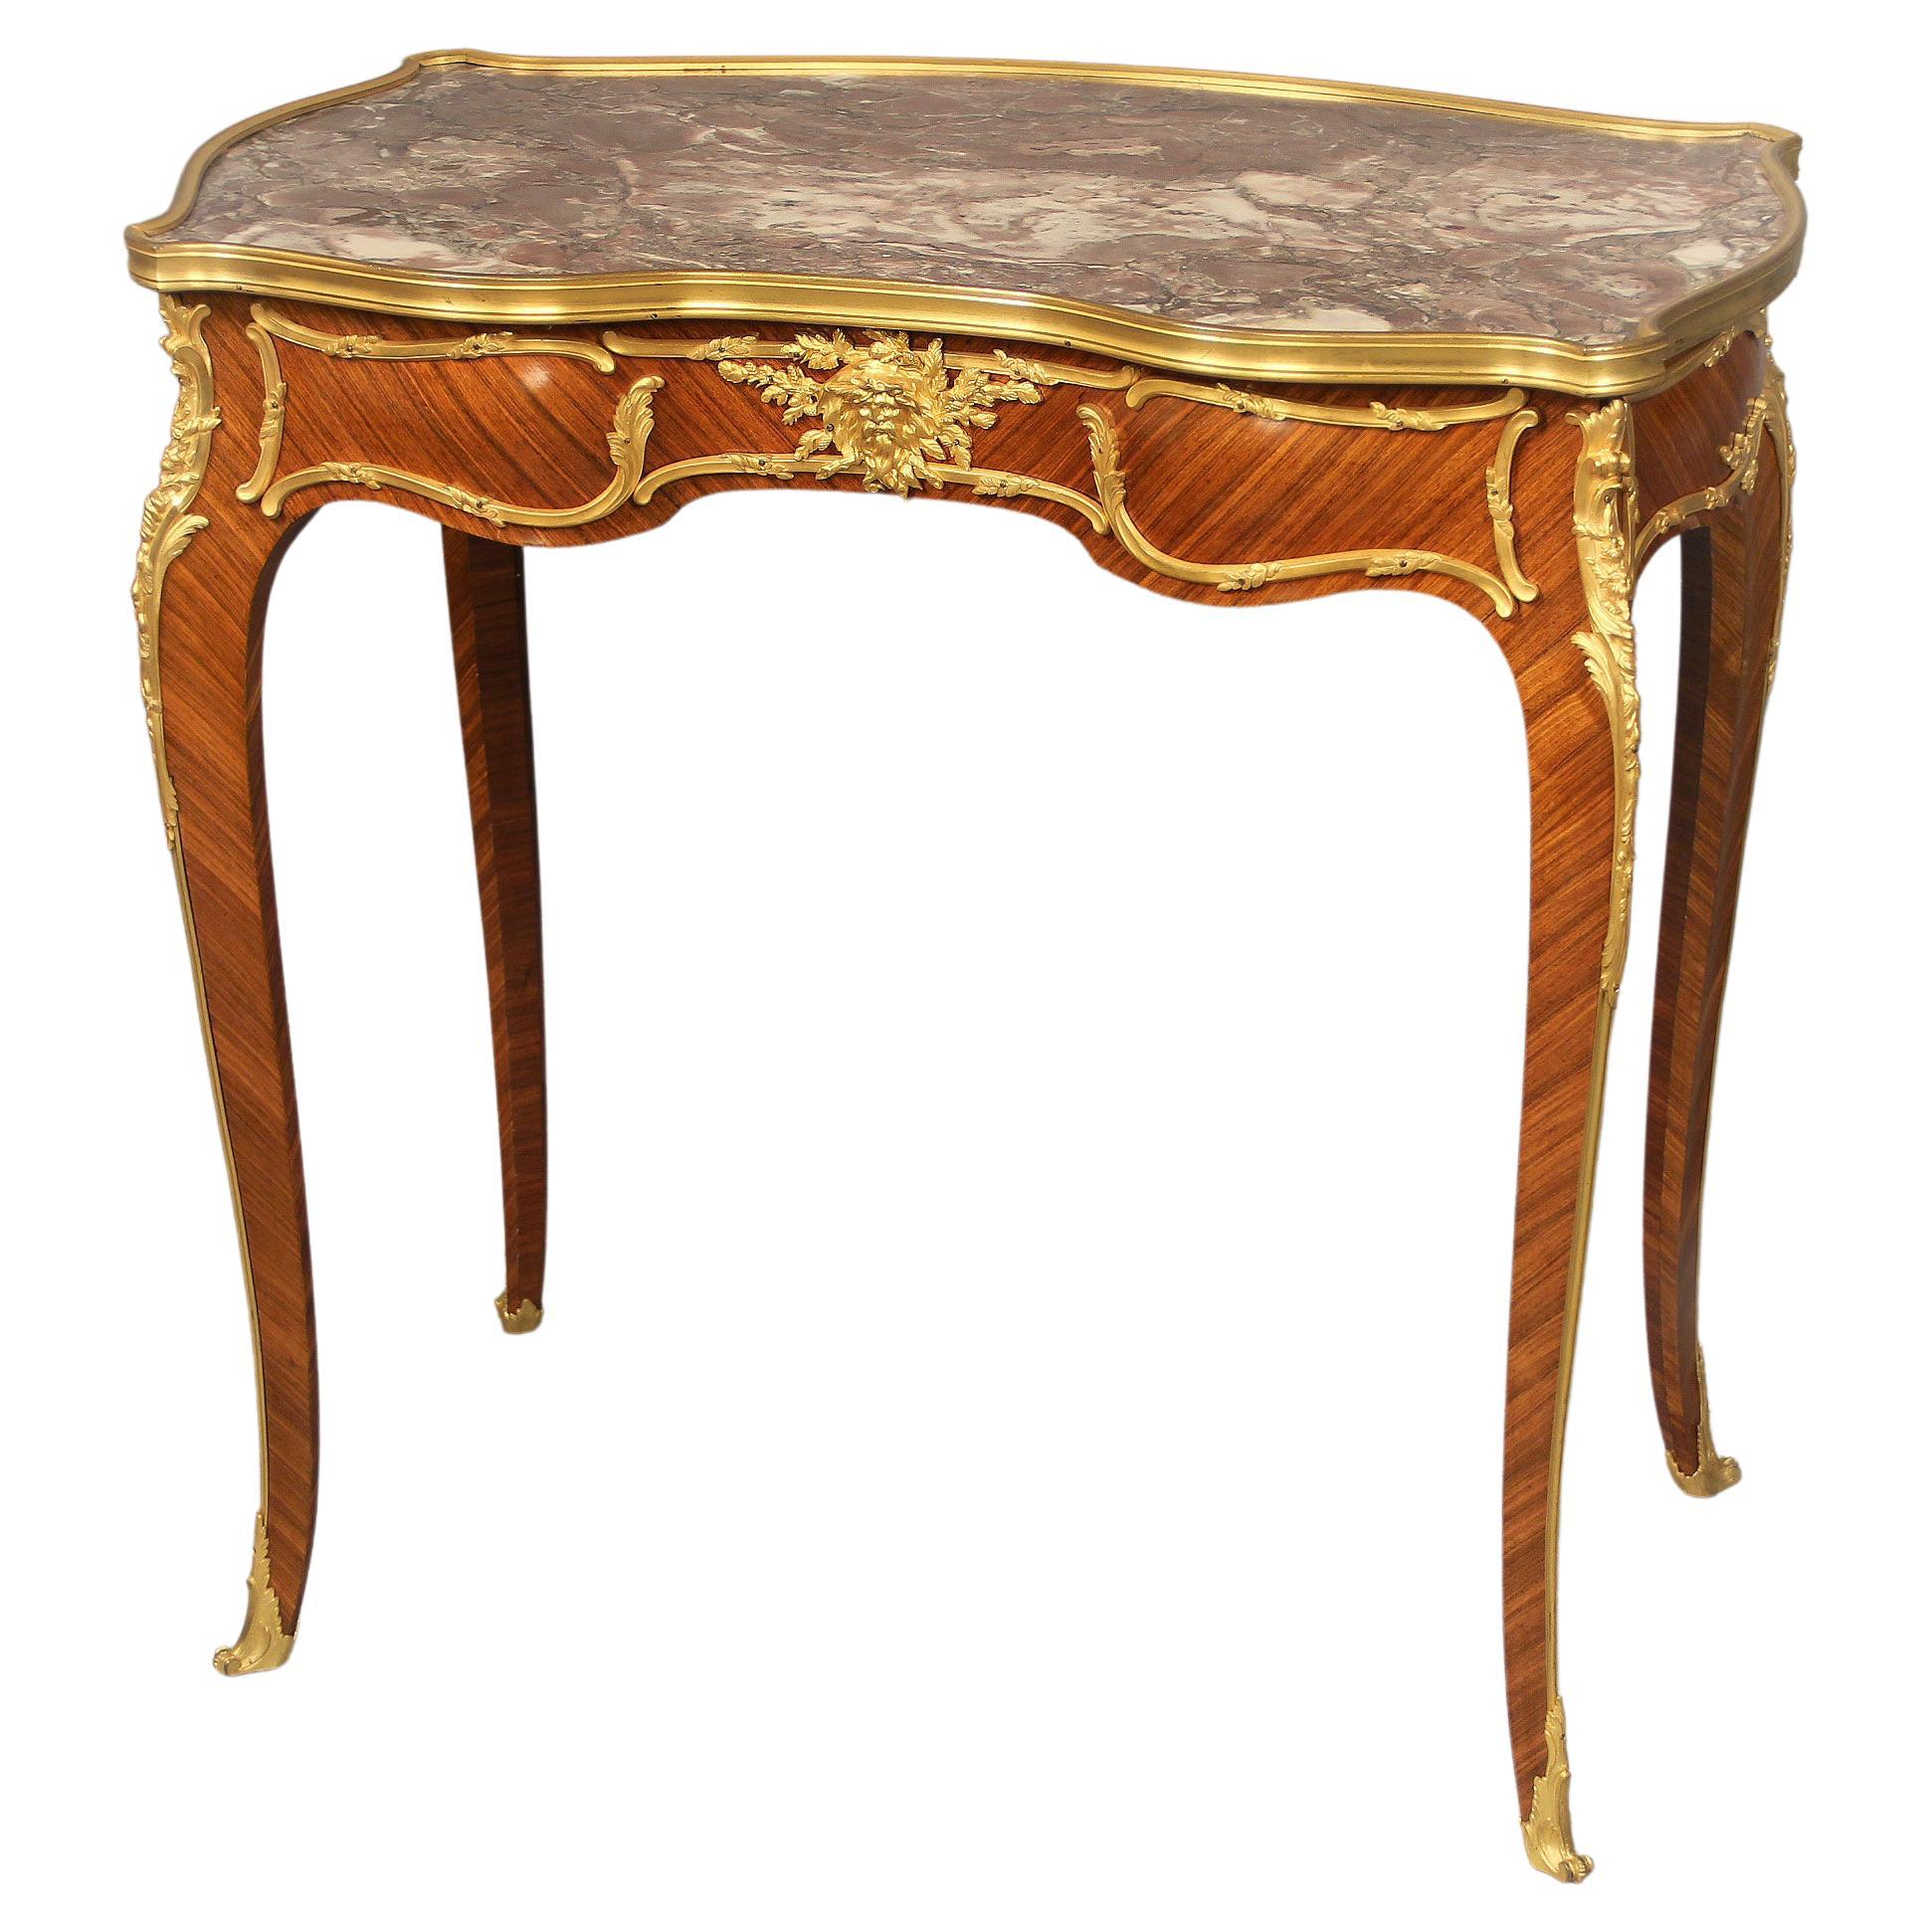 Fine Early 20th Century Gilt Bronze Mounted Side/Writing Table by François Linke